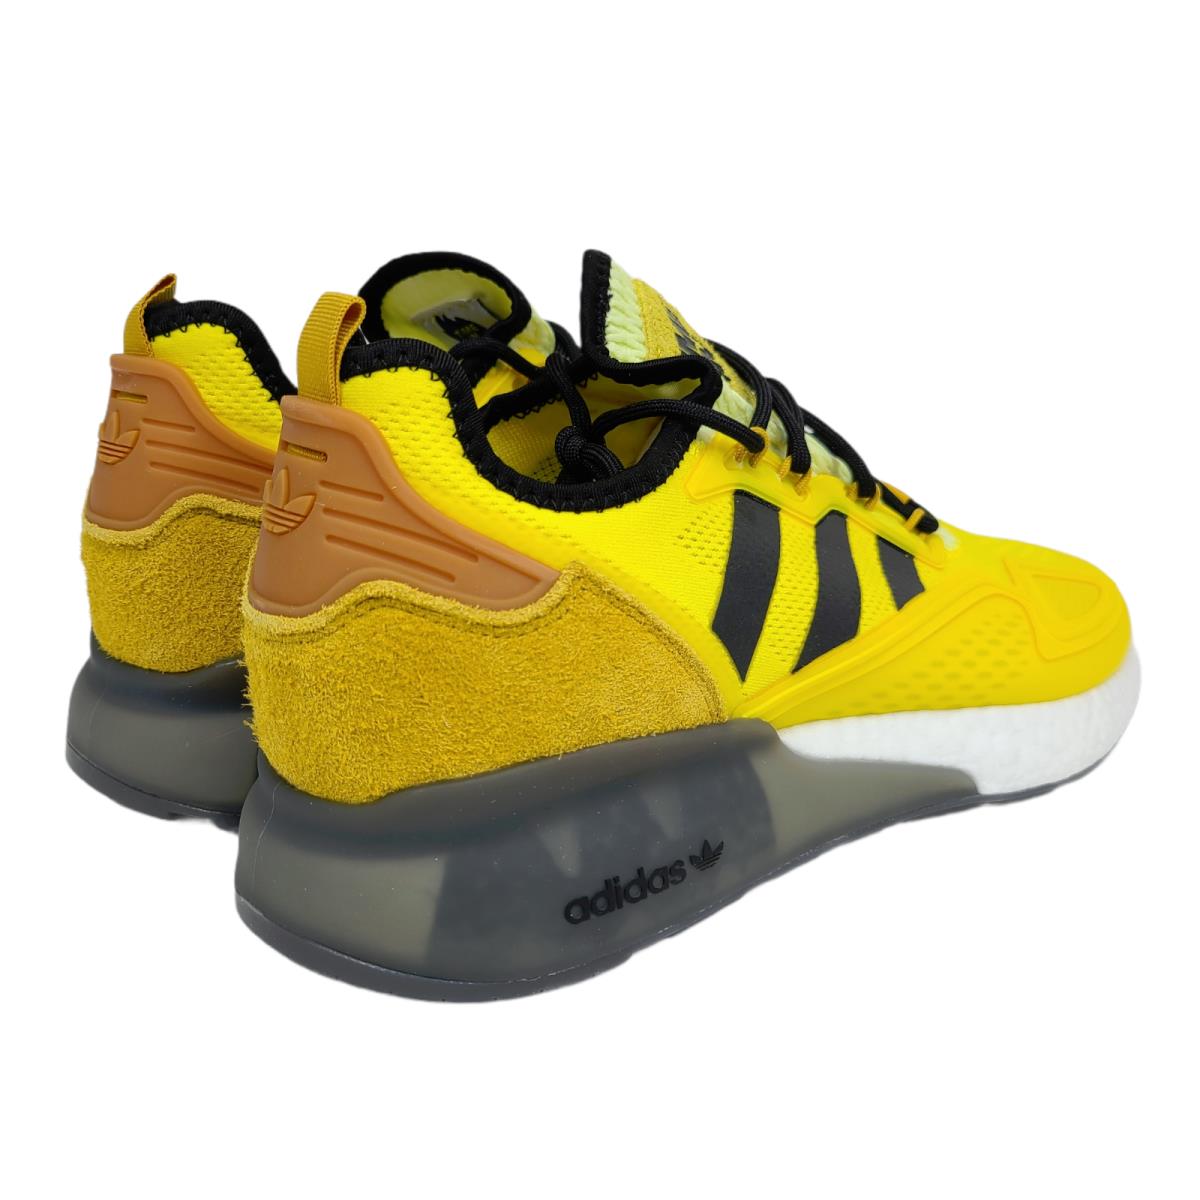 Adidas shoes Boost - Yellow 4